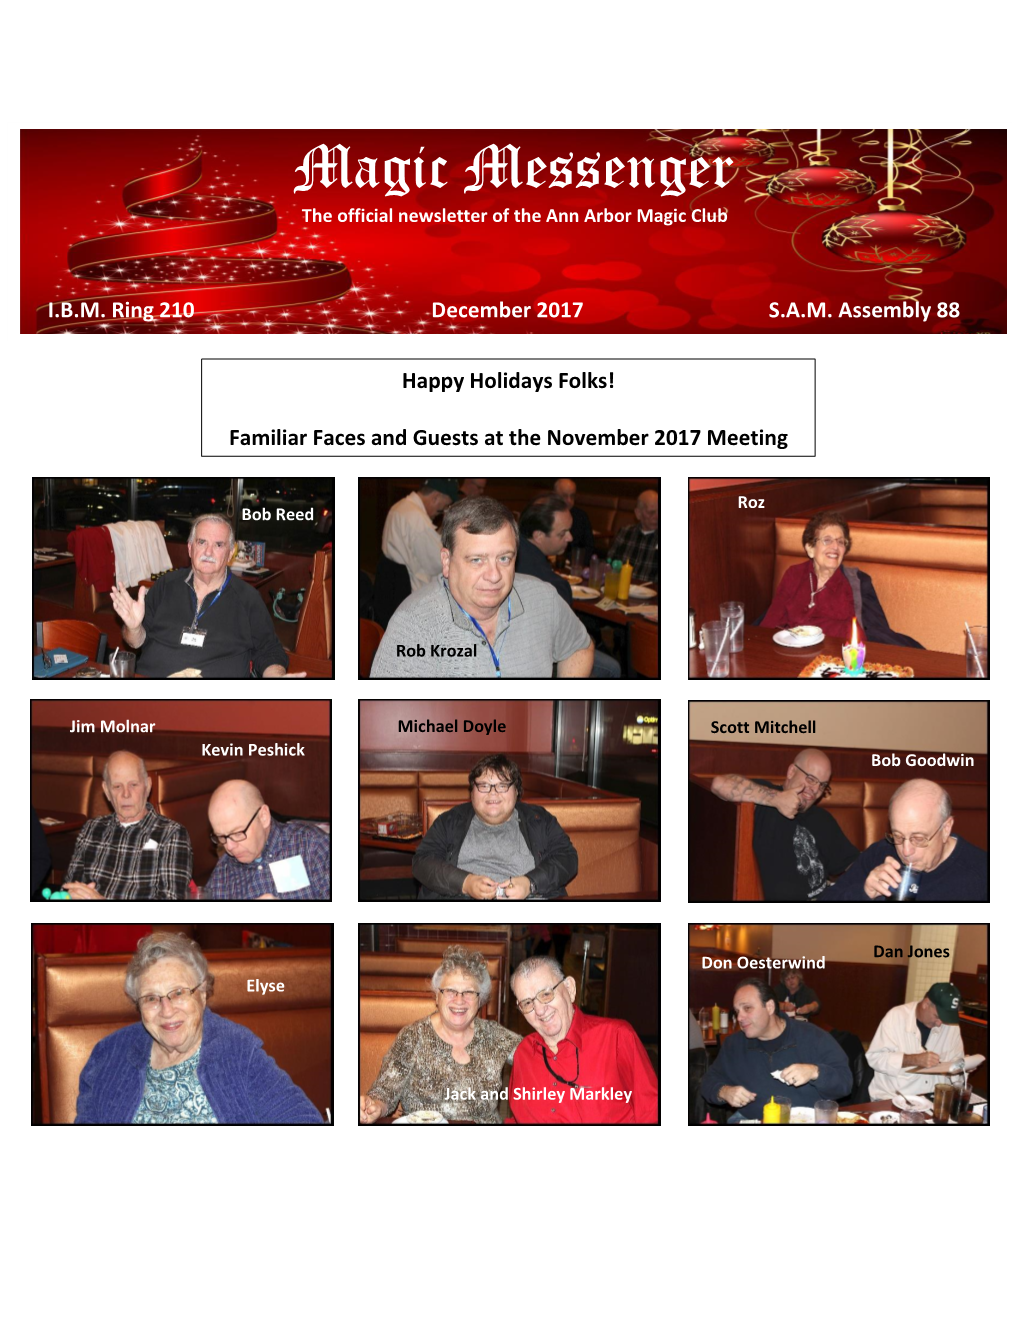 Magic Messenger the Official Newsletter of the Ann Arbor Magic Club